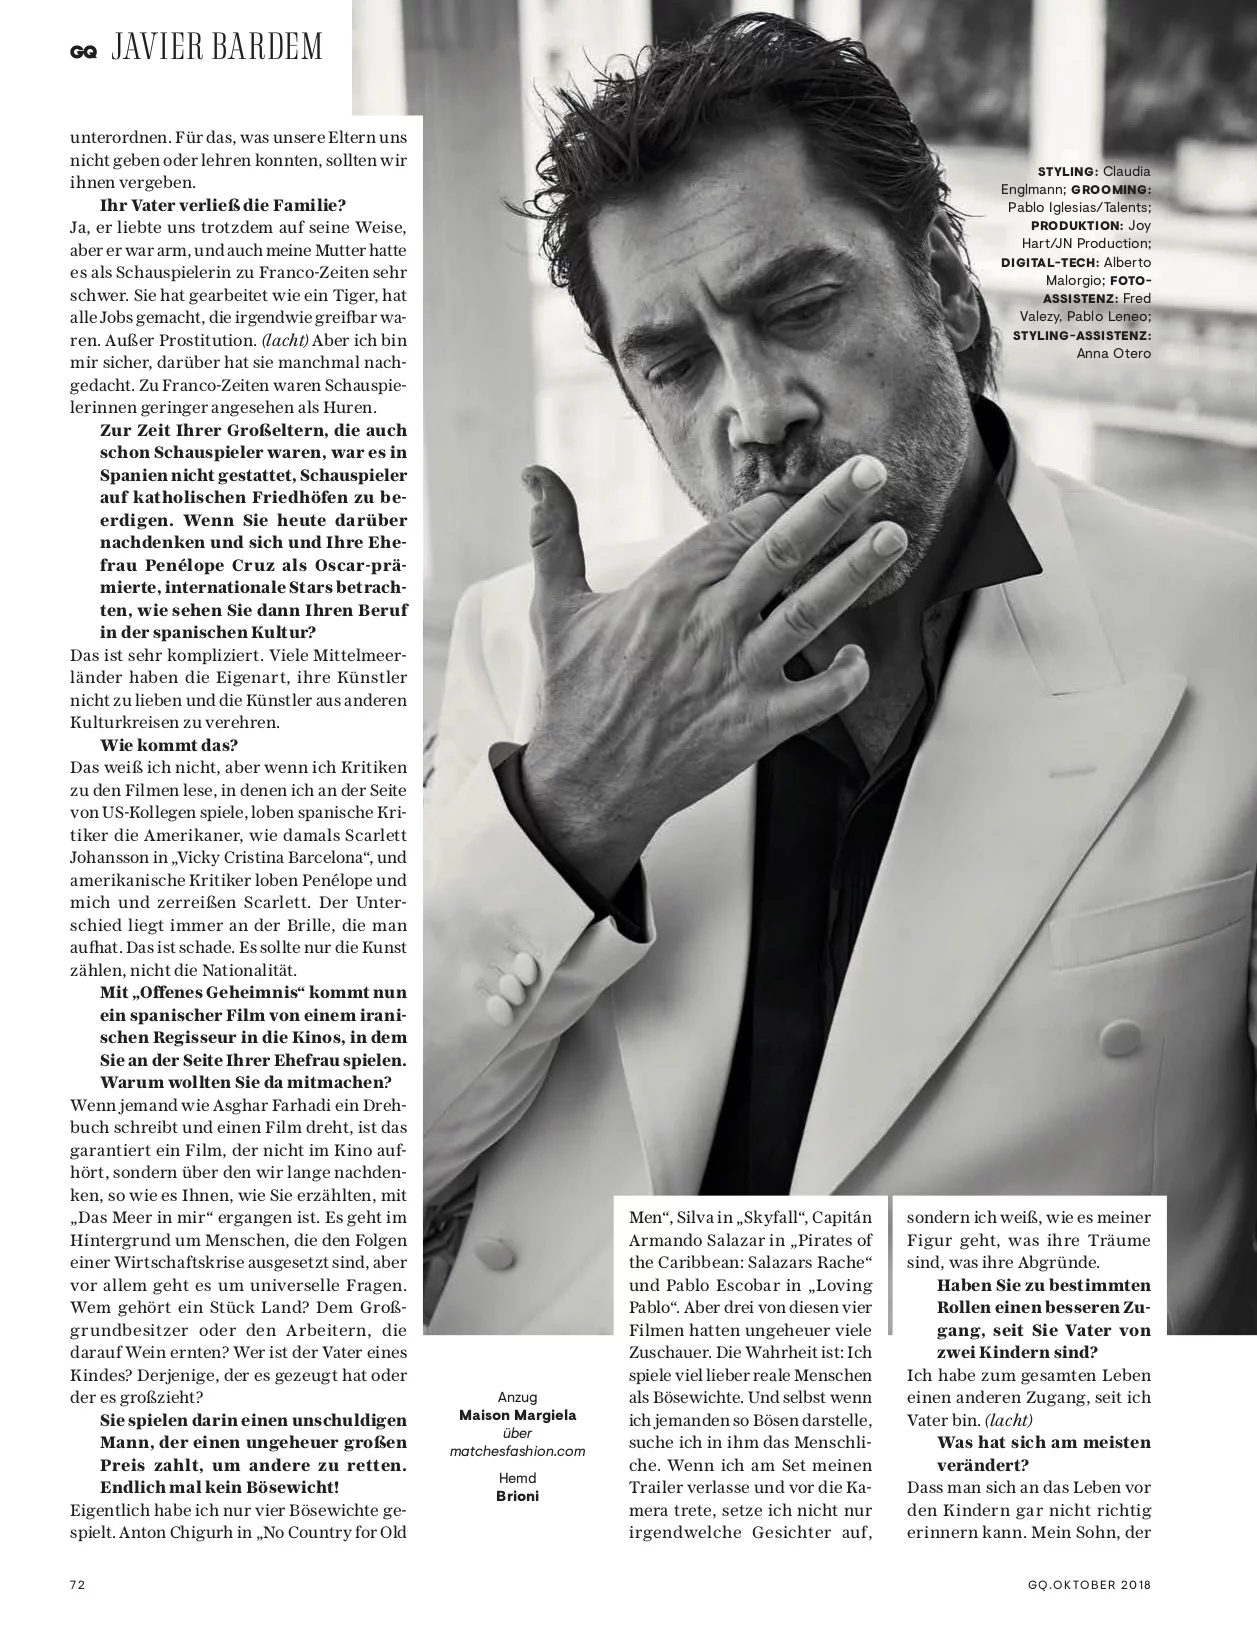 GQ with Javier Bardem 7 by Claudia ENGLMANN